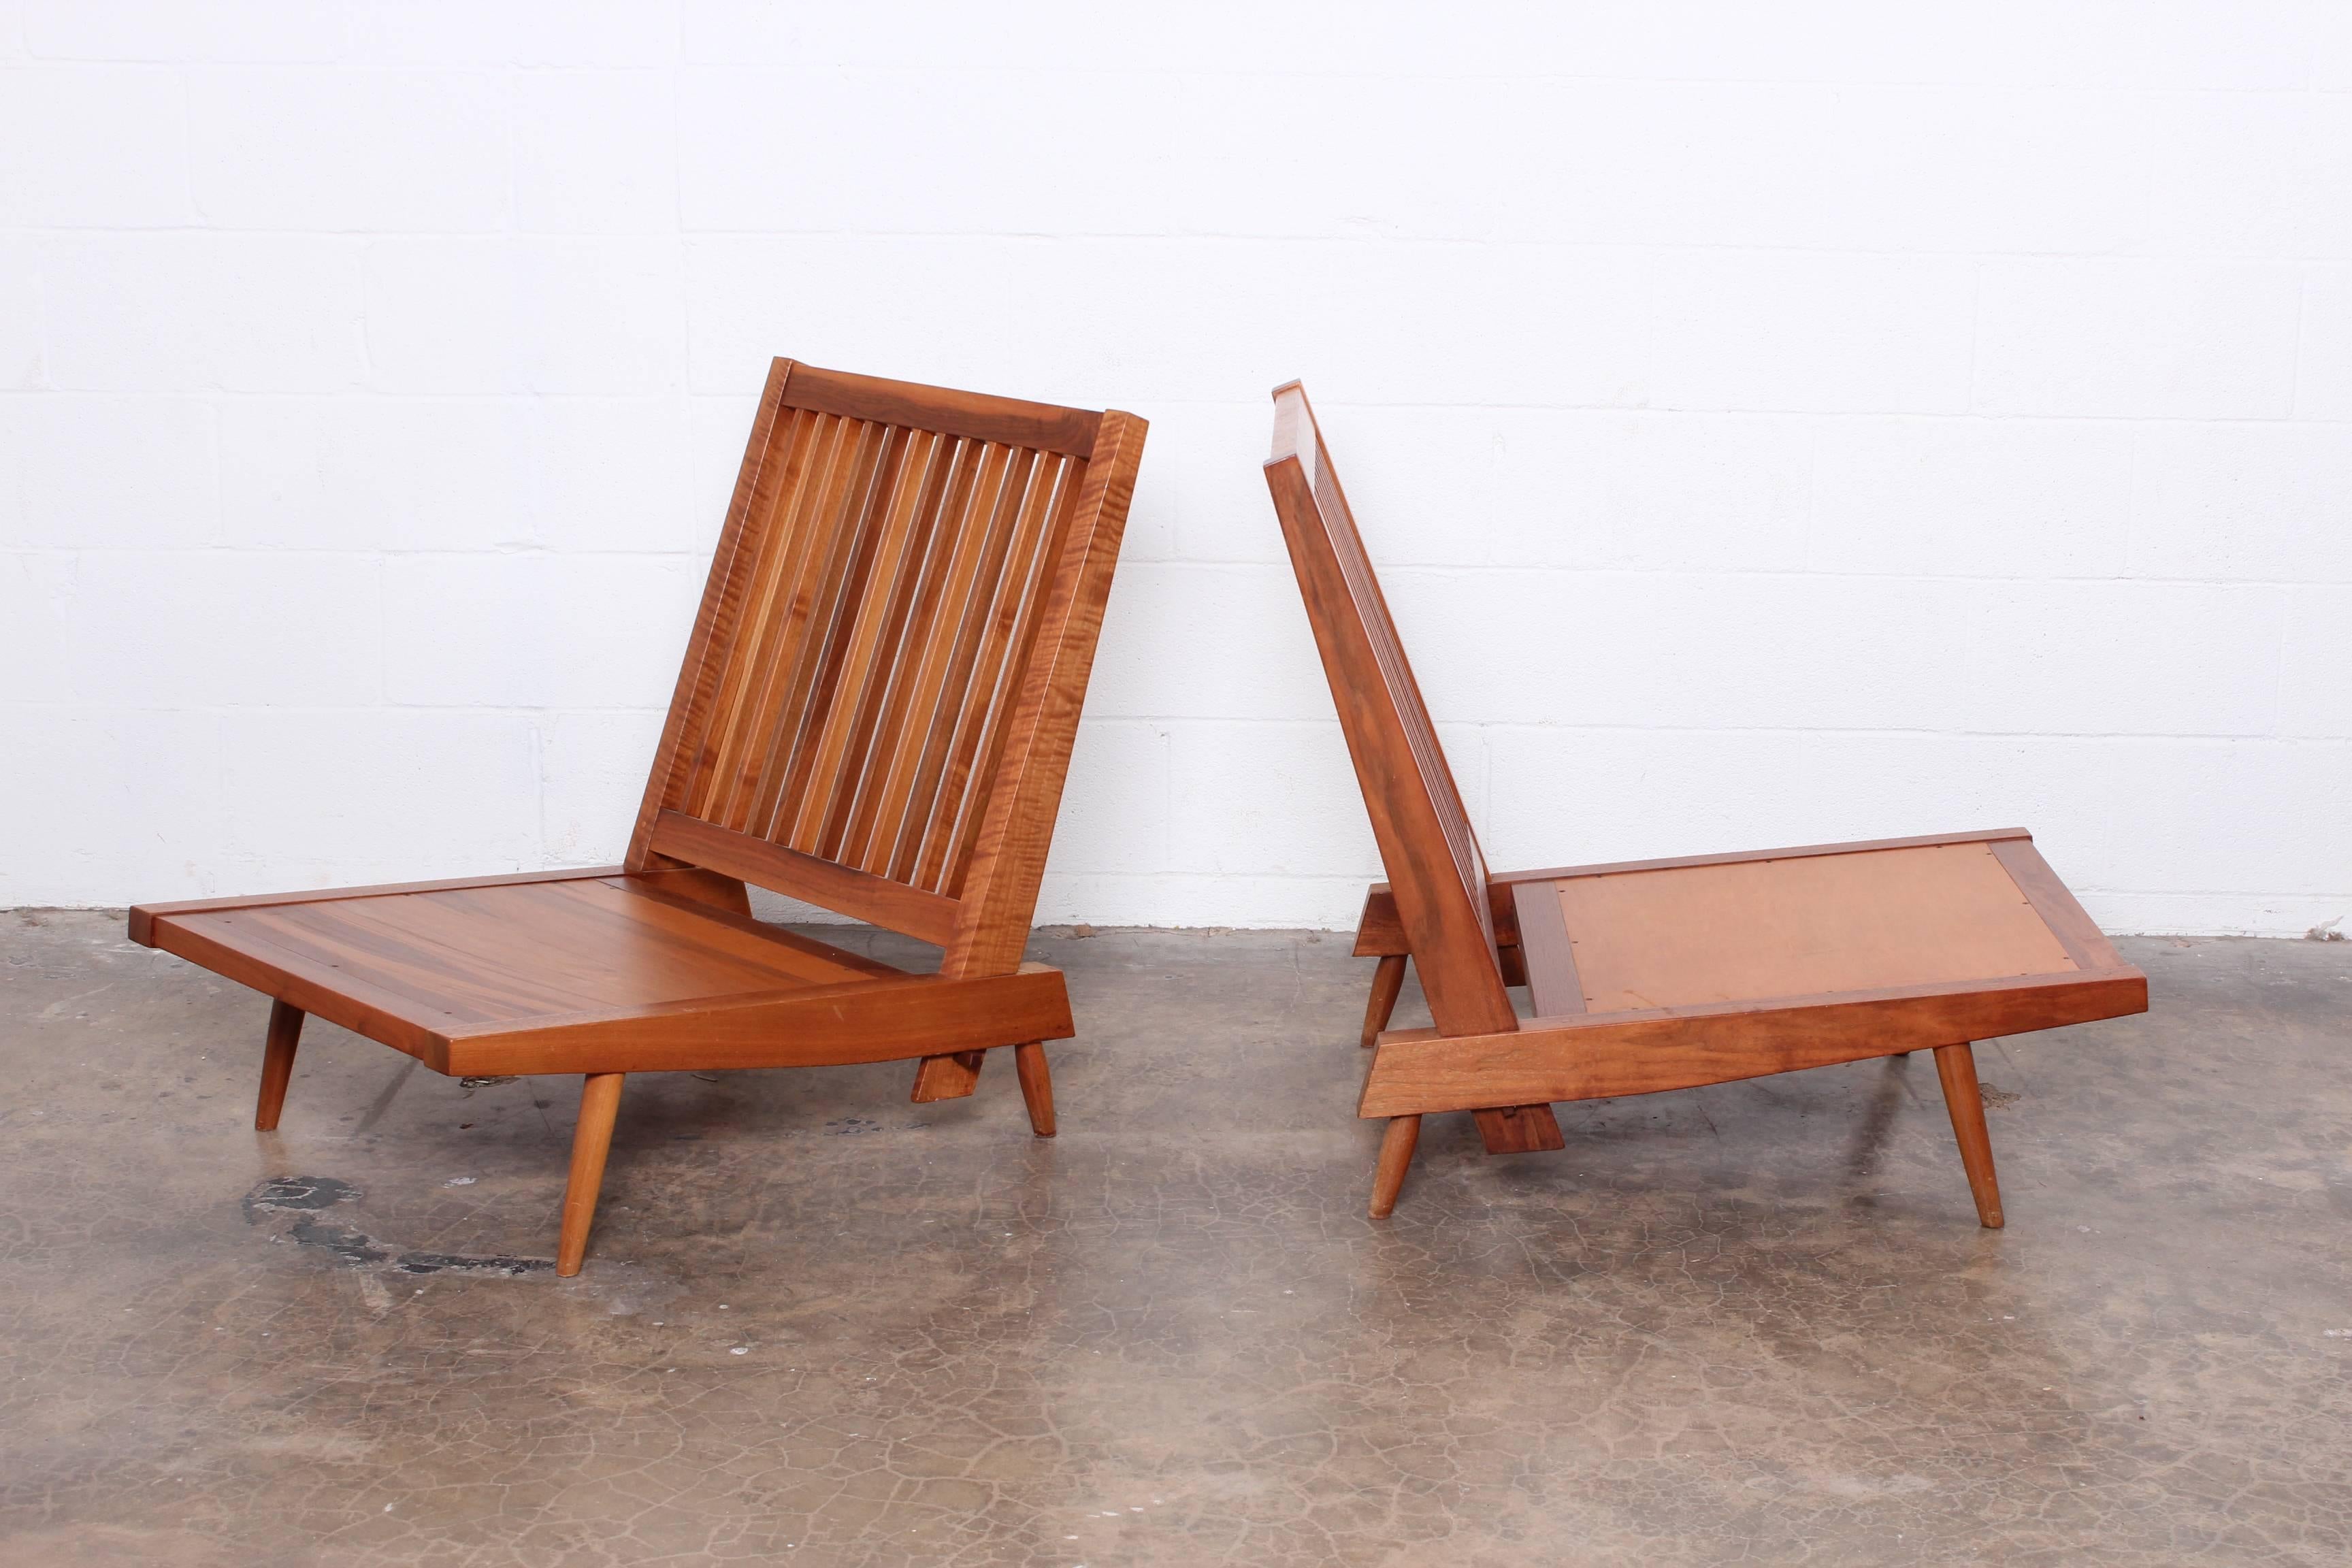 Pair of Spindle Back Lounge Chairs by George Nakashima 1